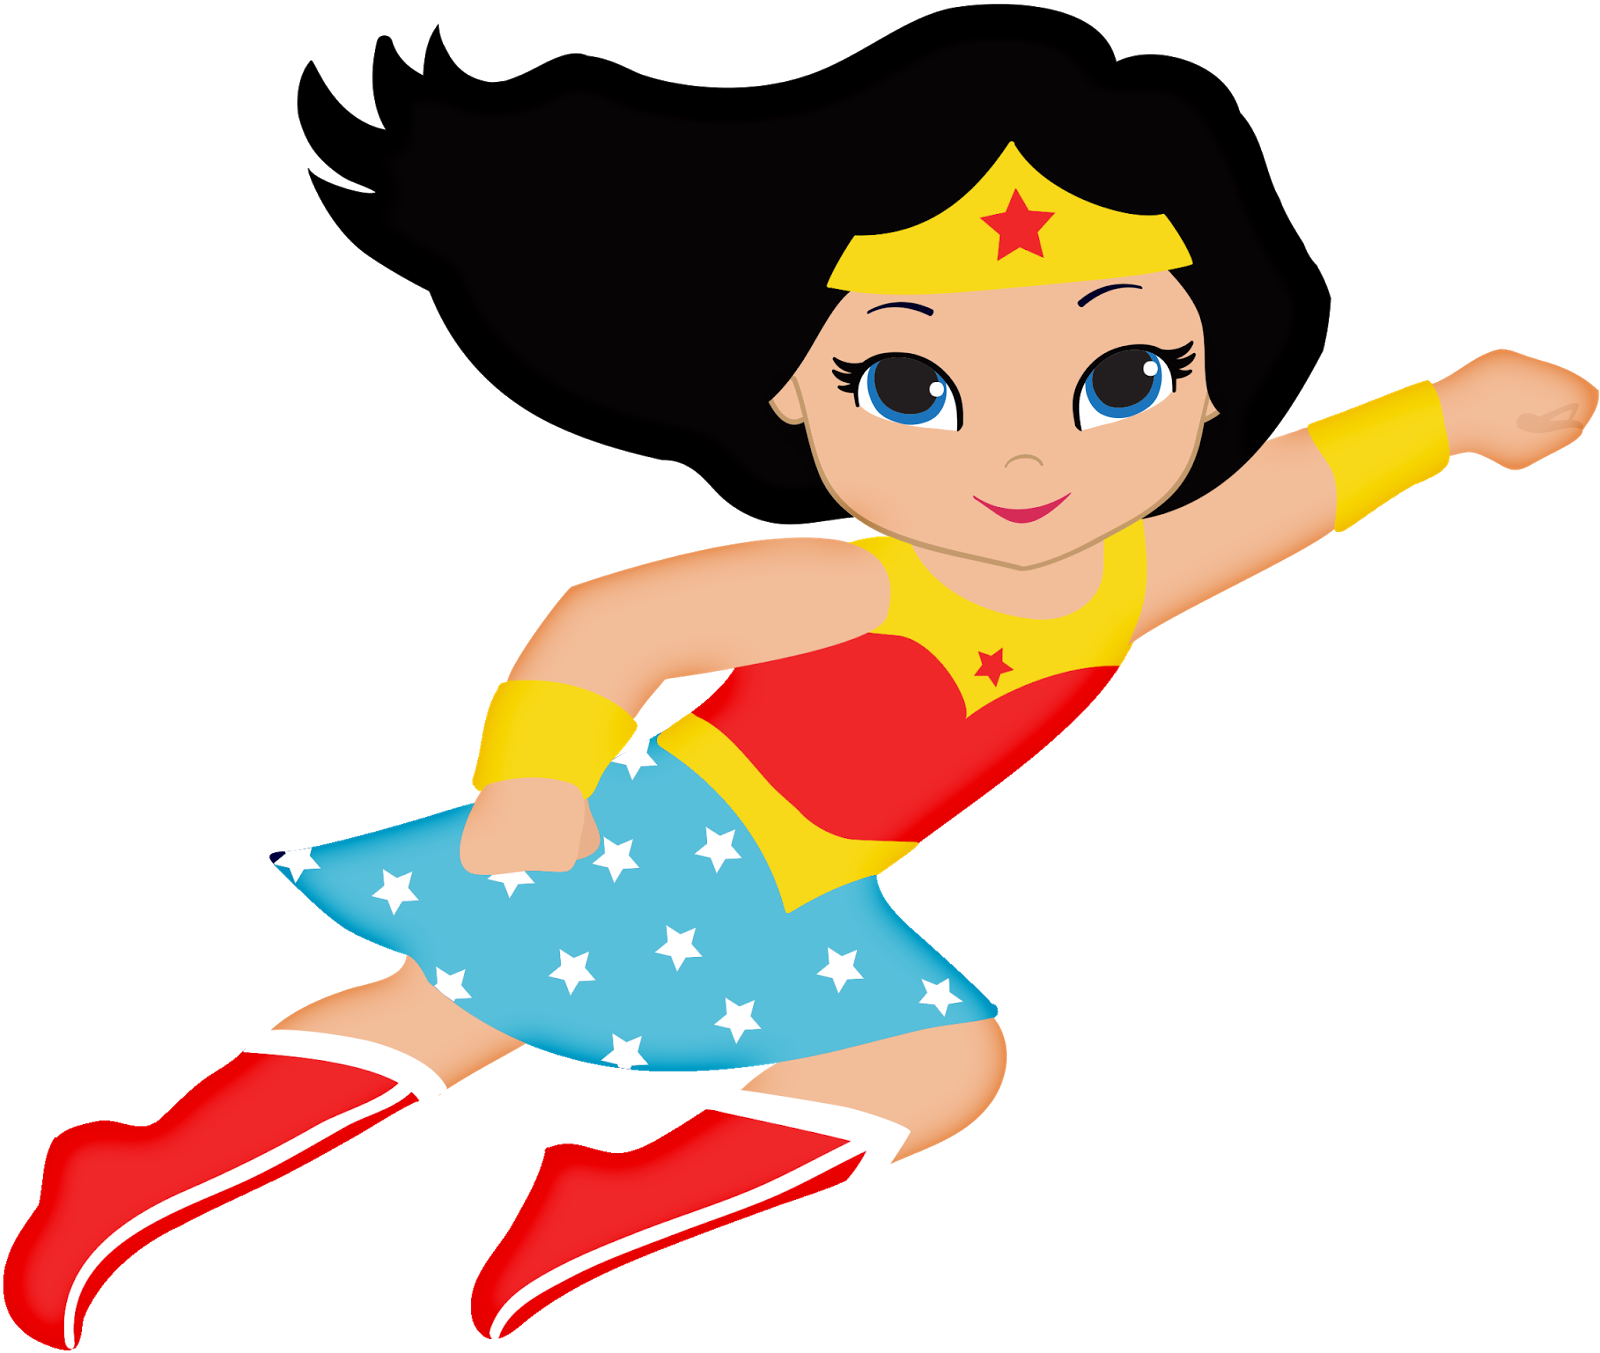 Wonder woman baby oh. Clipart images superman